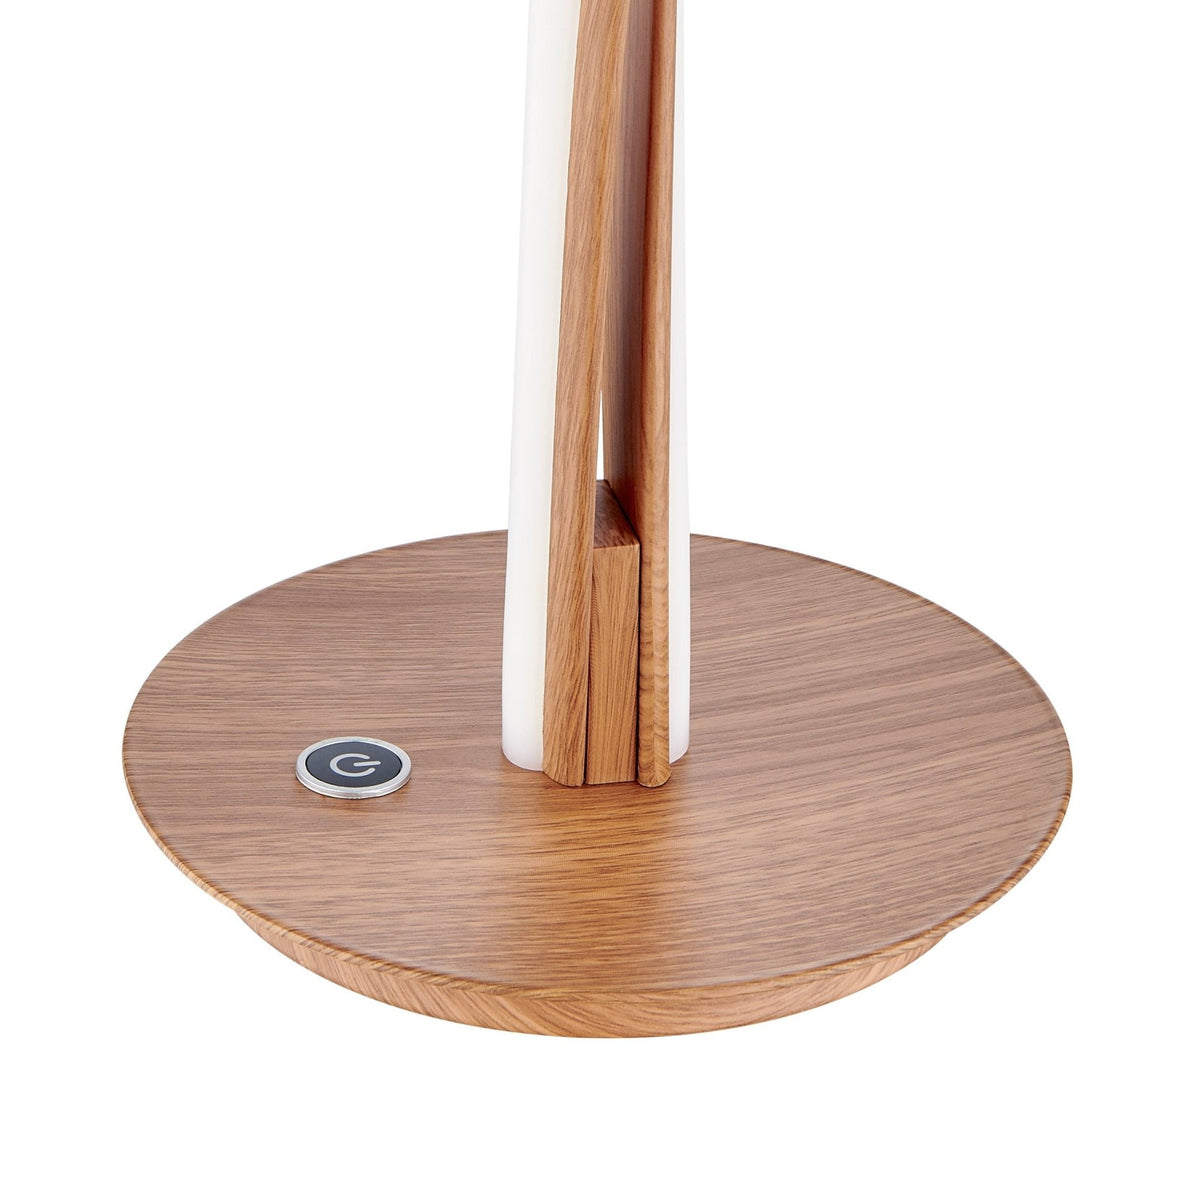 Finesse Decor Munich Wood LED Table Lamp with Touch Dimmer